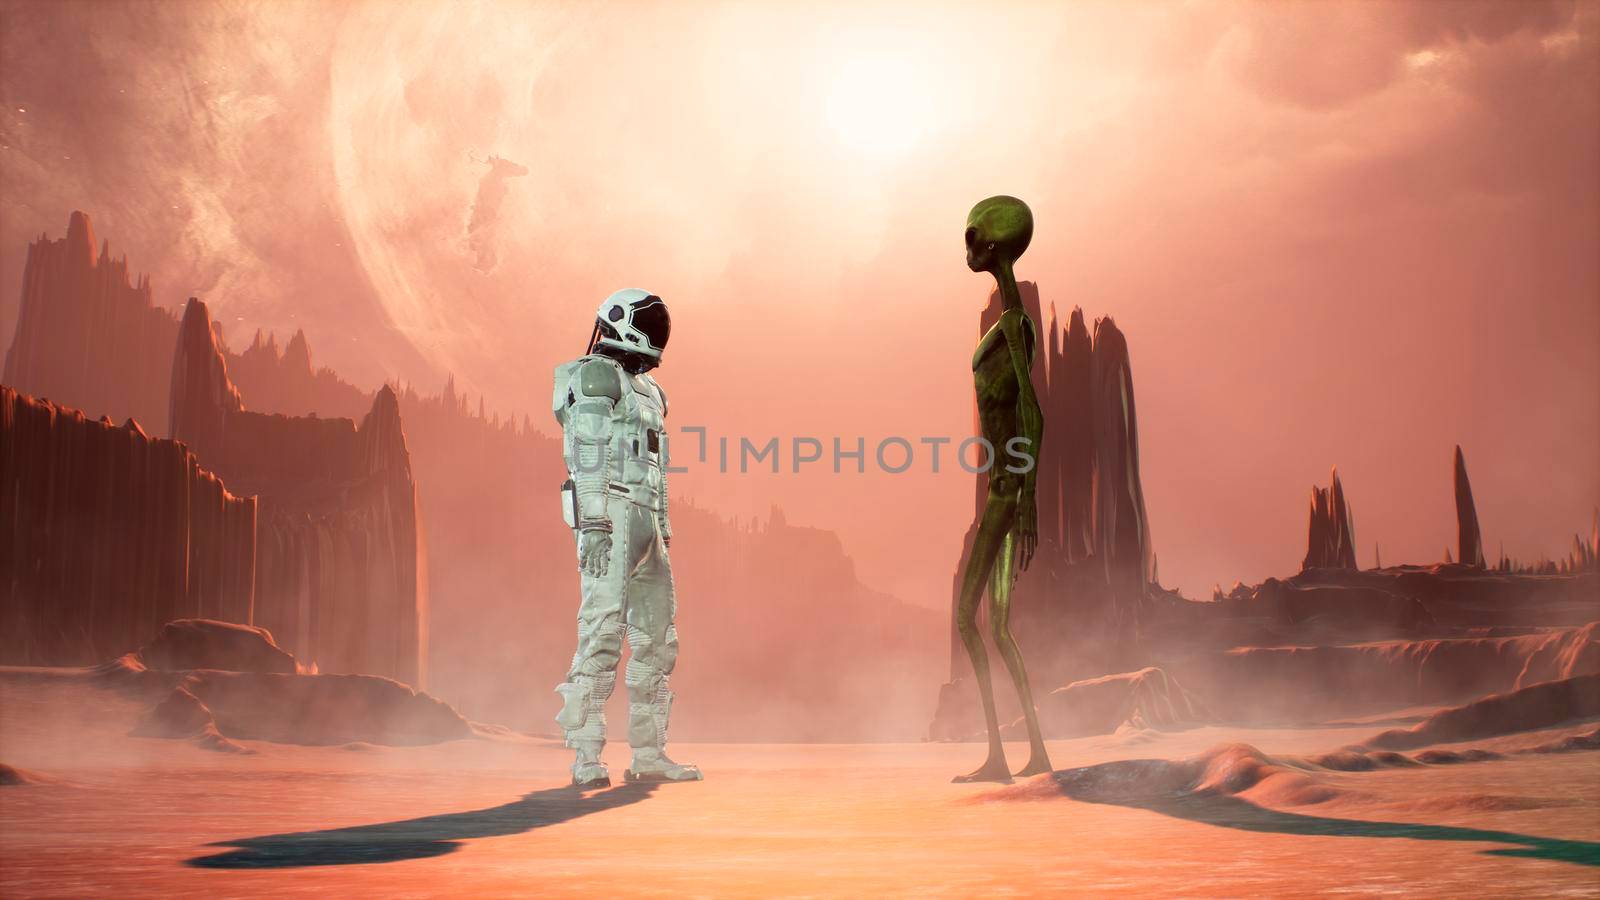 Meeting an alien and an astronaut on a mysterious planet in a distant deep space.